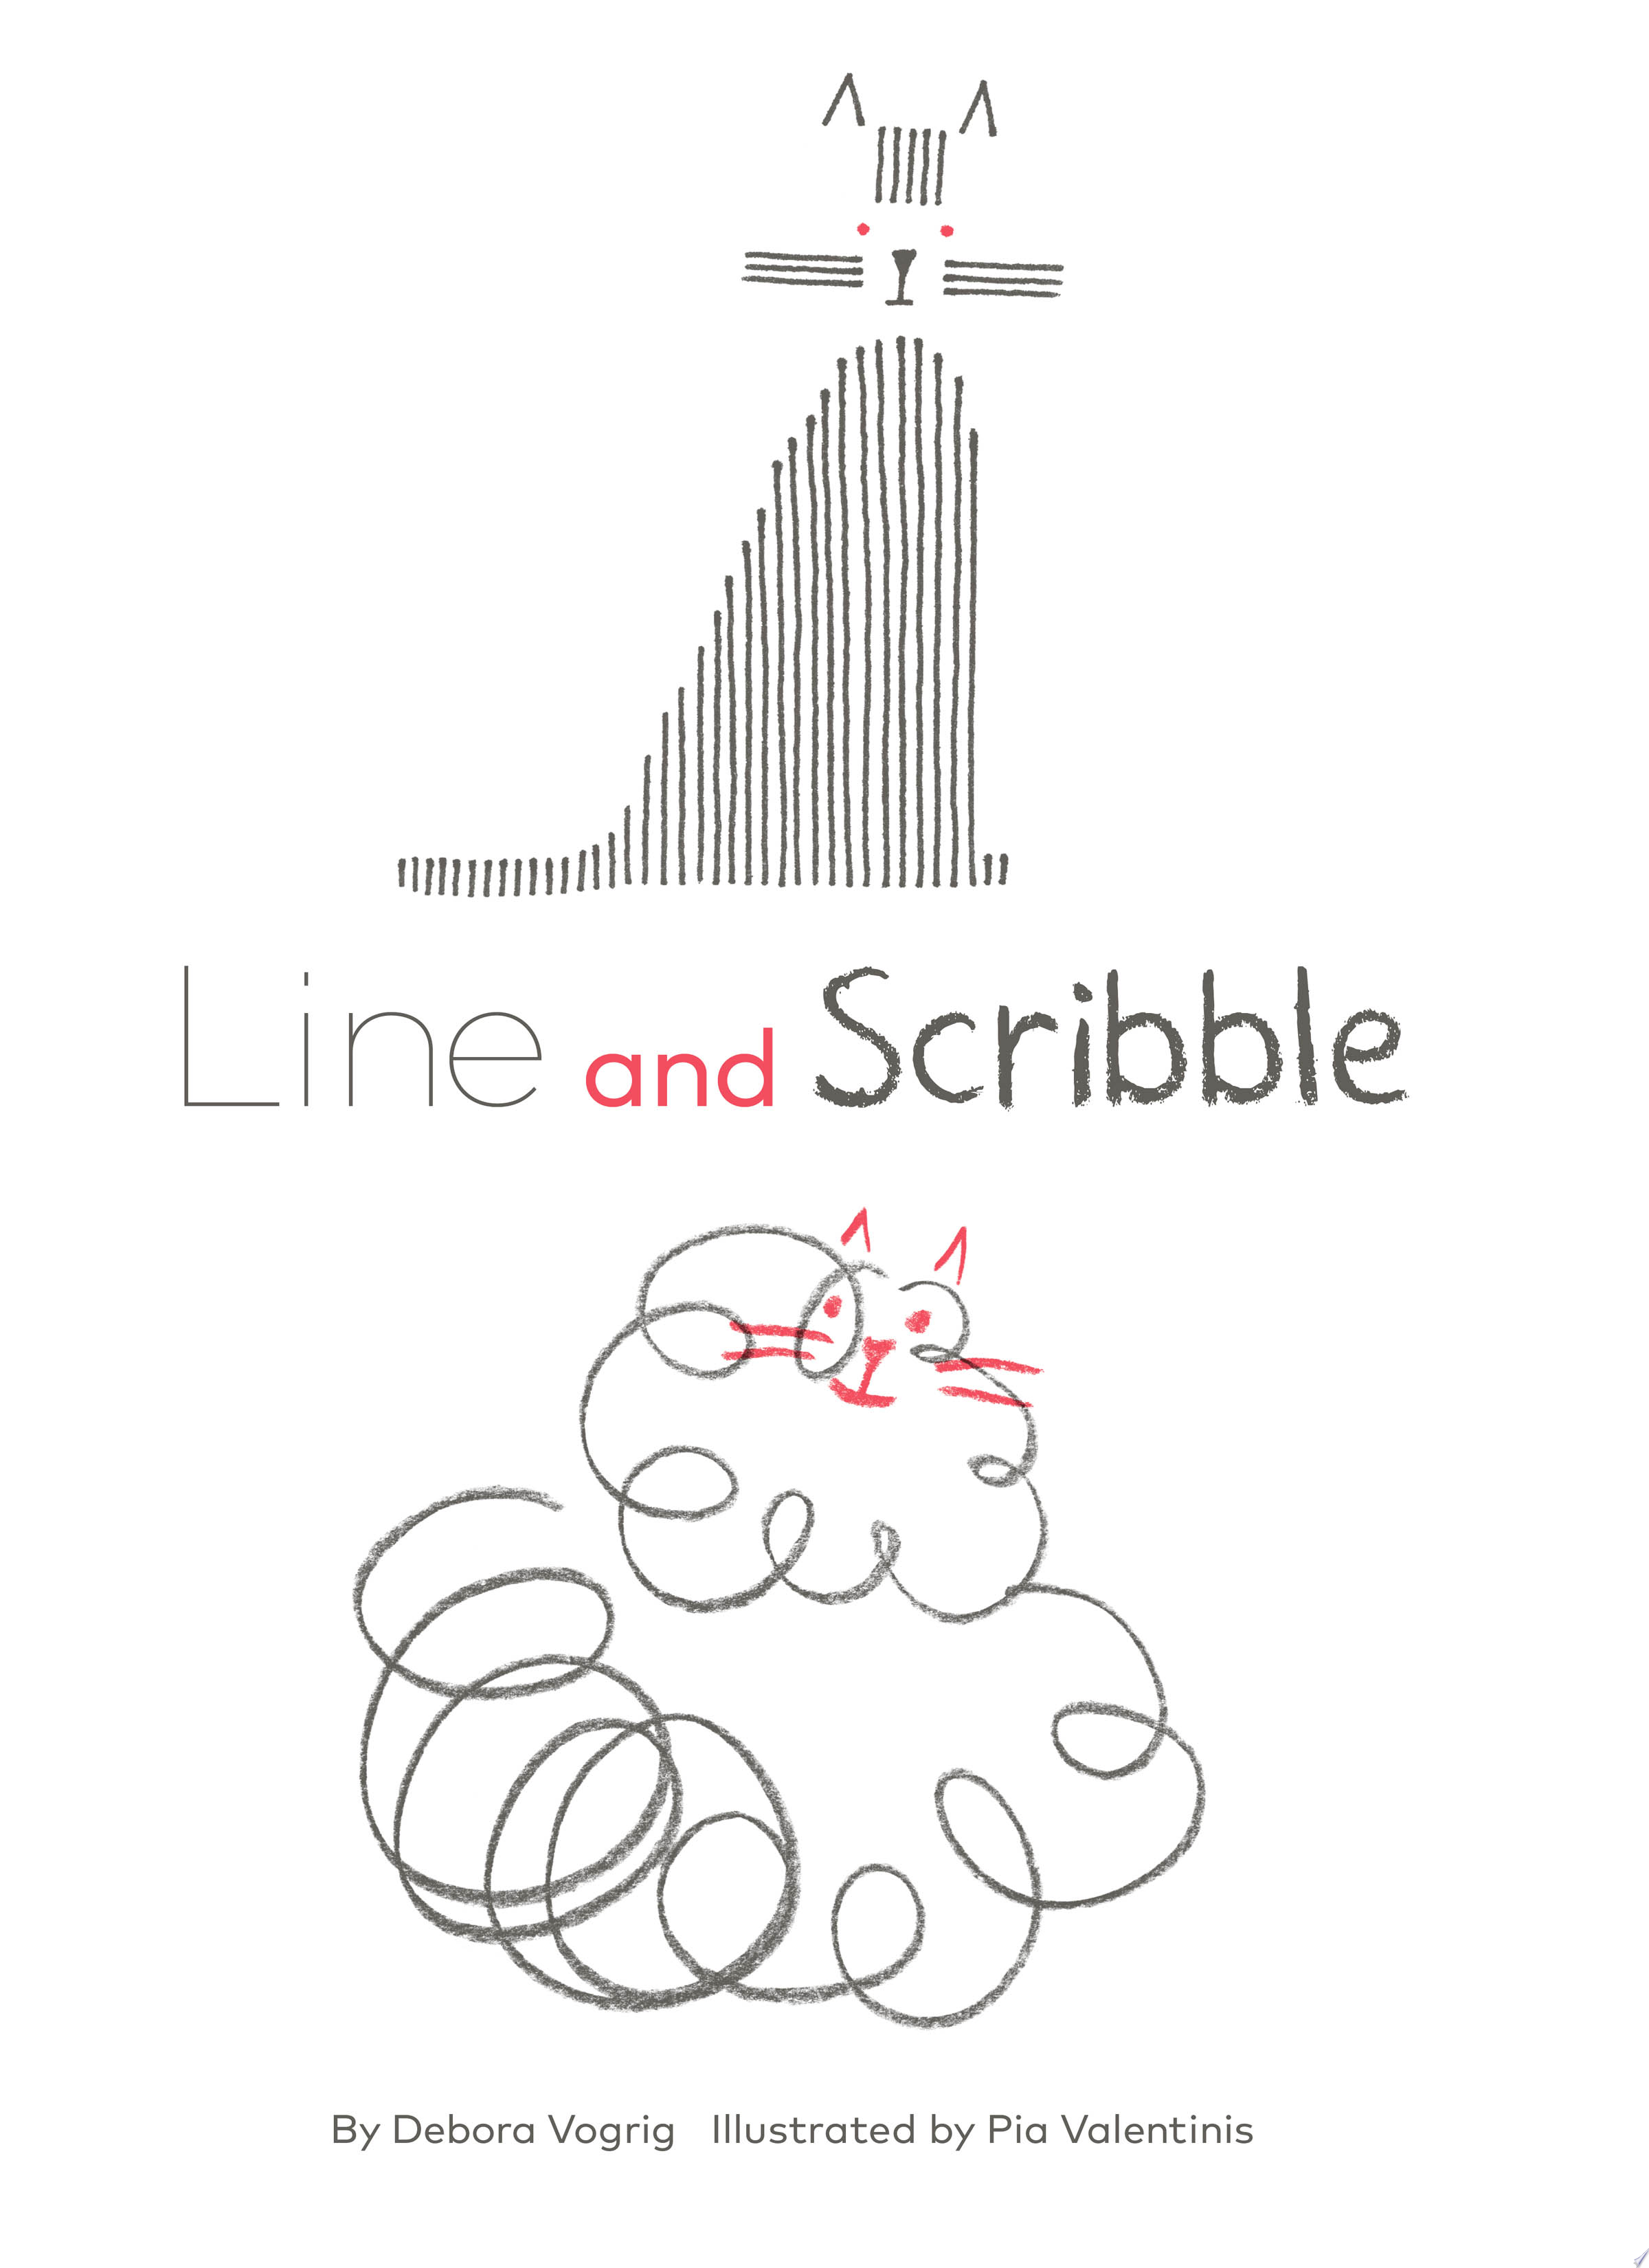 Image for "Line and Scribble"